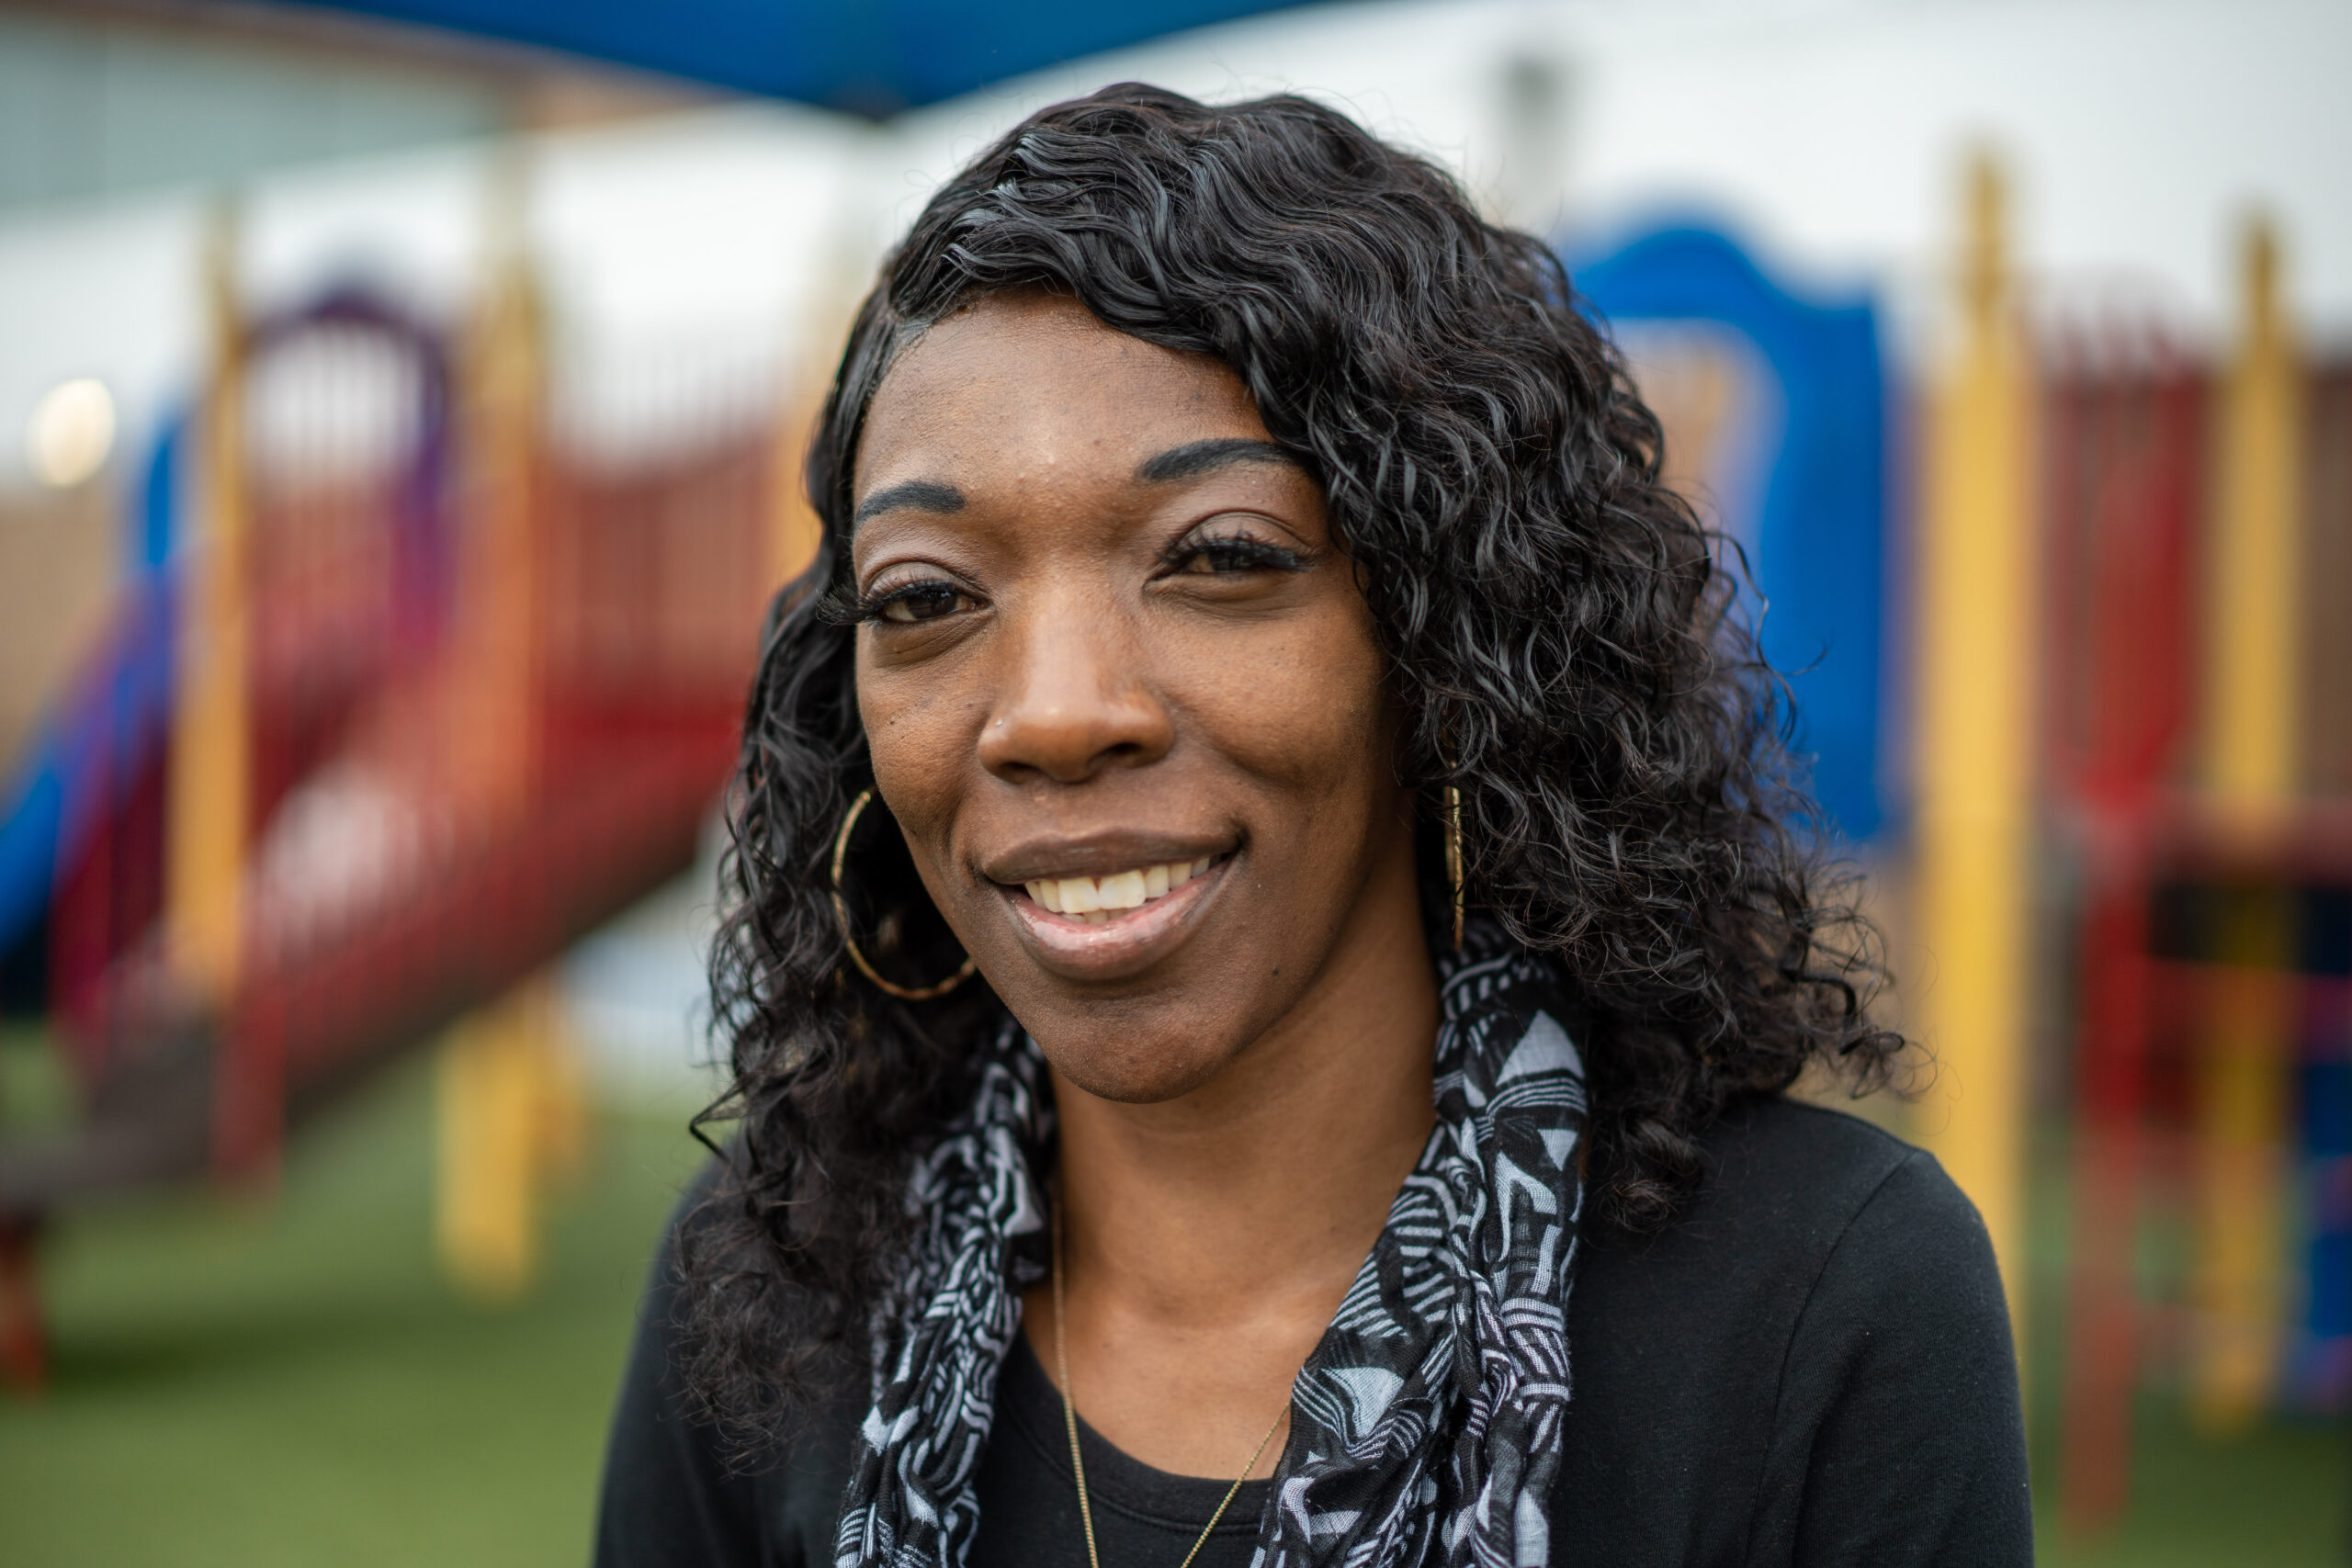 Assistant Director 
Taneisha Davis has over a decade of experience working with infants and young children and has been on the Rayner team for six years. She has four children of her own whom she enjoys spending time with when not at Rayner.